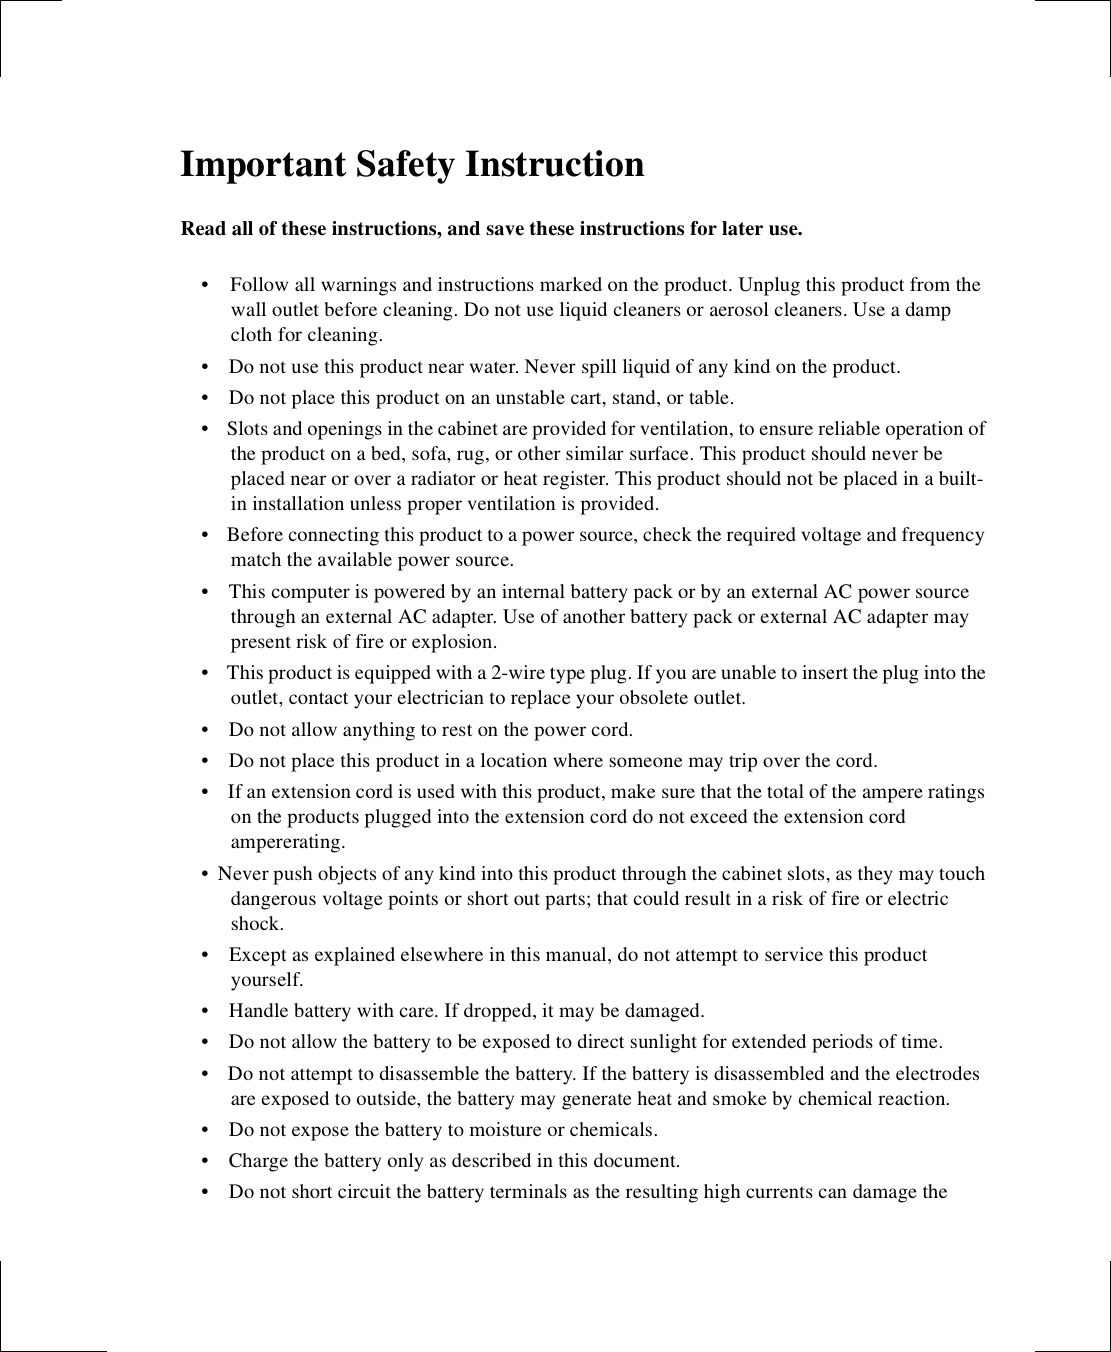 Important Safety InstructionRead all of these instructions, and save these instructions for later use.•  Follow all warnings and instructions marked on the product. Unplug this product from the wall outlet before cleaning. Do not use liquid cleaners or aerosol cleaners. Use a damp cloth for cleaning.•    Do not use this product near water. Never spill liquid of any kind on the product.•    Do not place this product on an unstable cart, stand, or table.•    Slots and openings in the cabinet are provided for ventilation, to ensure reliable operation of the product on a bed, sofa, rug, or other similar surface. This product should never be placed near or over a radiator or heat register. This product should not be placed in a built-in installation unless proper ventilation is provided.•    Before connecting this product to a power source, check the required voltage and frequency match the available power source.•    This computer is powered by an internal battery pack or by an external AC power source through an external AC adapter. Use of another battery pack or external AC adapter may present risk of fire or explosion.•    This product is equipped with a 2-wire type plug. If you are unable to insert the plug into the outlet, contact your electrician to replace your obsolete outlet.•    Do not allow anything to rest on the power cord.•    Do not place this product in a location where someone may trip over the cord.•   If an extension cord is used with this product, make sure that the total of the ampere ratings on the products plugged into the extension cord do not exceed the extension cord ampererating. • Never push objects of any kind into this product through the cabinet slots, as they may touch dangerous voltage points or short out parts; that could result in a risk of fire or electric shock.•   Except as explained elsewhere in this manual, do not attempt to service this product yourself.•   Handle battery with care. If dropped, it may be damaged.•   Do not allow the battery to be exposed to direct sunlight for extended periods of time.•   Do not attempt to disassemble the battery. If the battery is disassembled and the electrodes  are exposed to outside, the battery may generate heat and smoke by chemical reaction.•   Do not expose the battery to moisture or chemicals.•   Charge the battery only as described in this document.•   Do not short circuit the battery terminals as the resulting high currents can damage the 